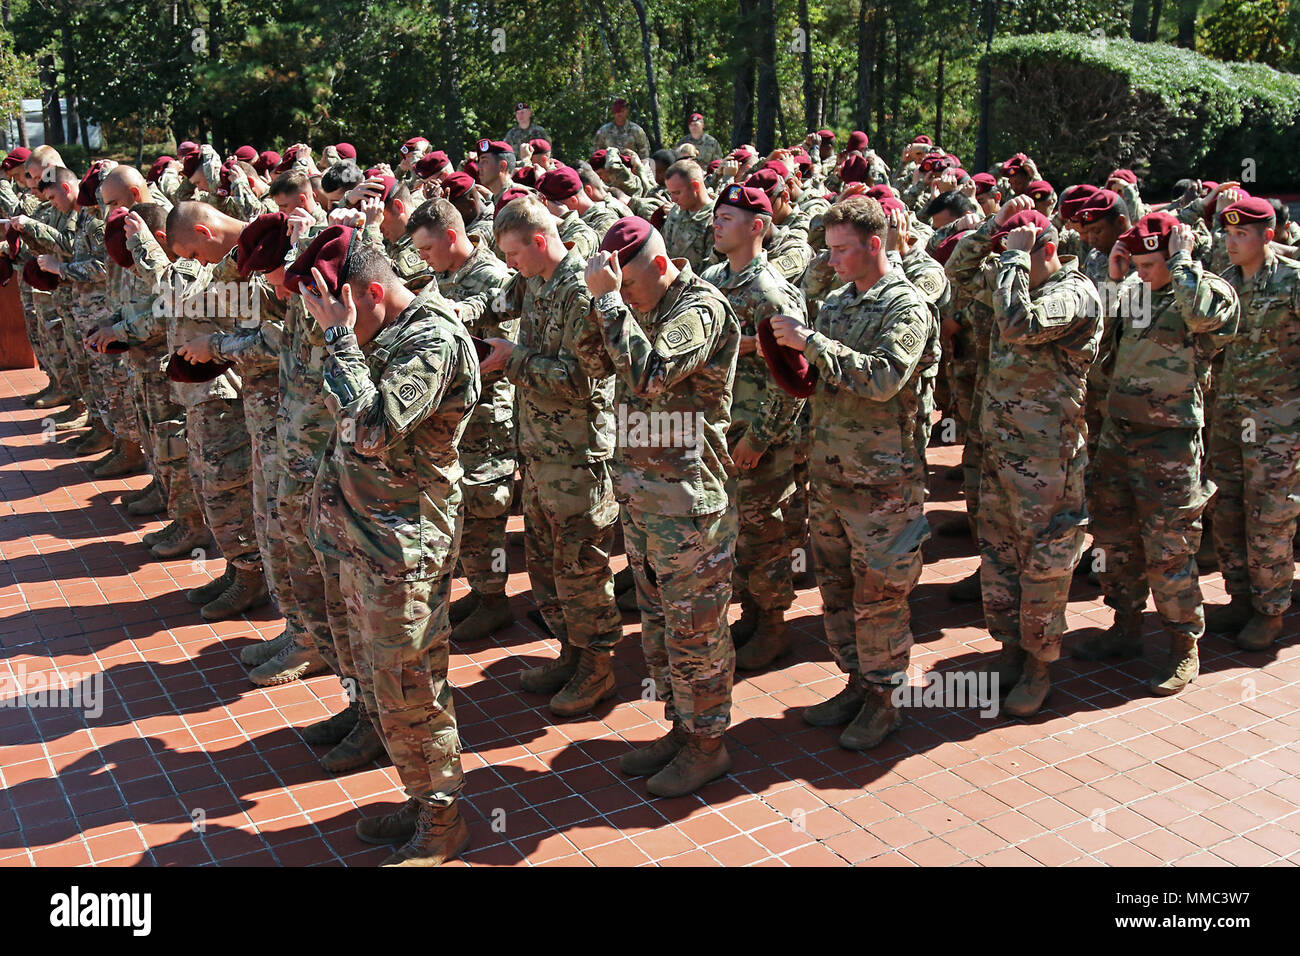 New 82nd Airborne Division Paratroopers don maroon berets during the  Airborne Integration Course Beret Donning Ceremony, Oct. 5, 2017, at Fort  Bragg, N.C. The ceremony symbolizes integrating new Paratroopers to the  Division